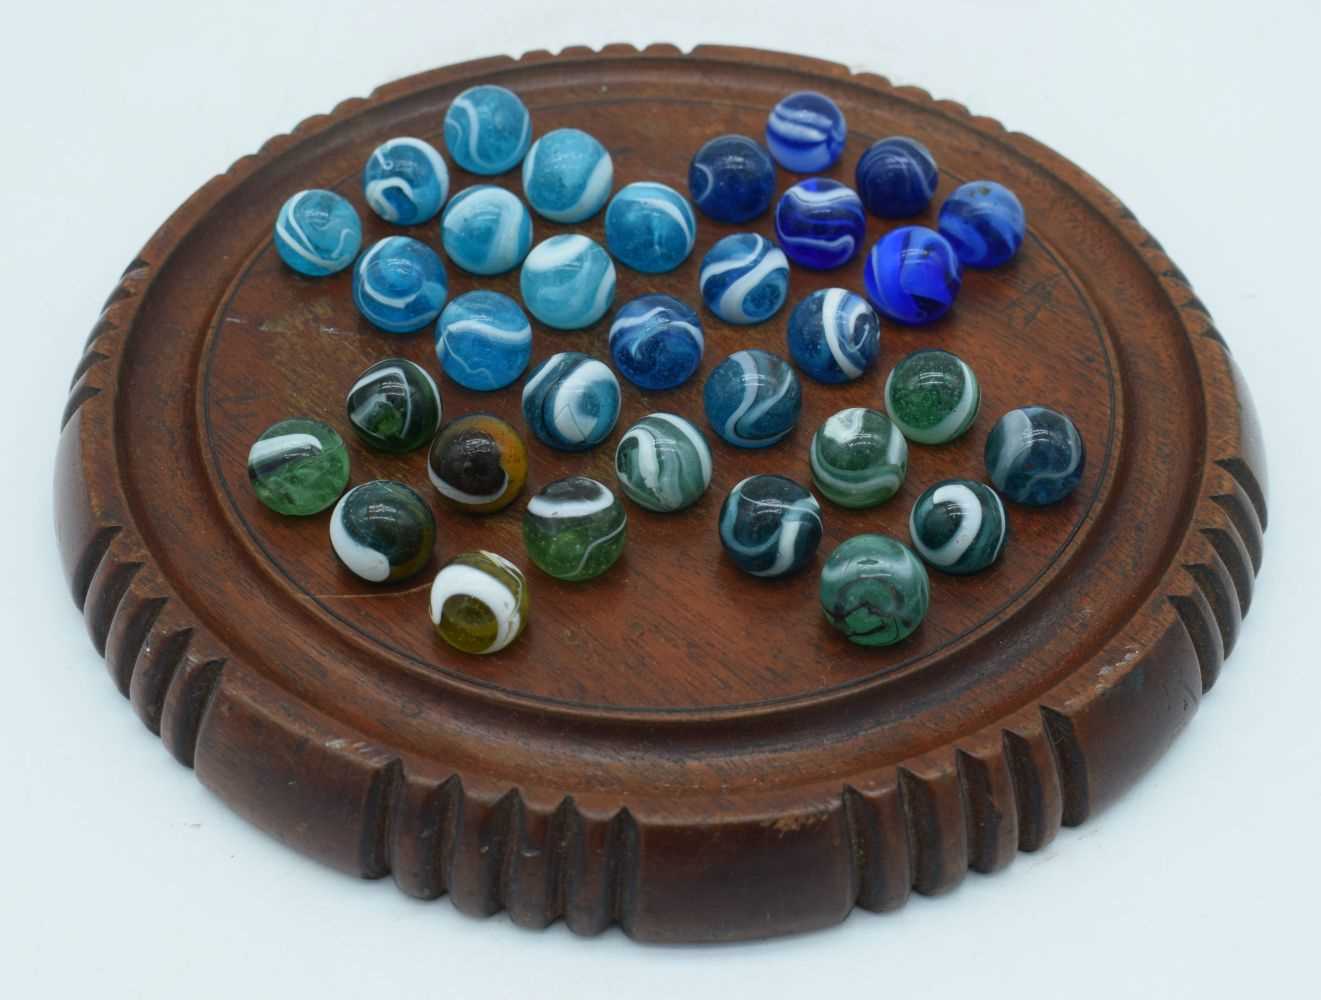 An antique Solitaire board with marbles 24 cm. - Image 3 of 4